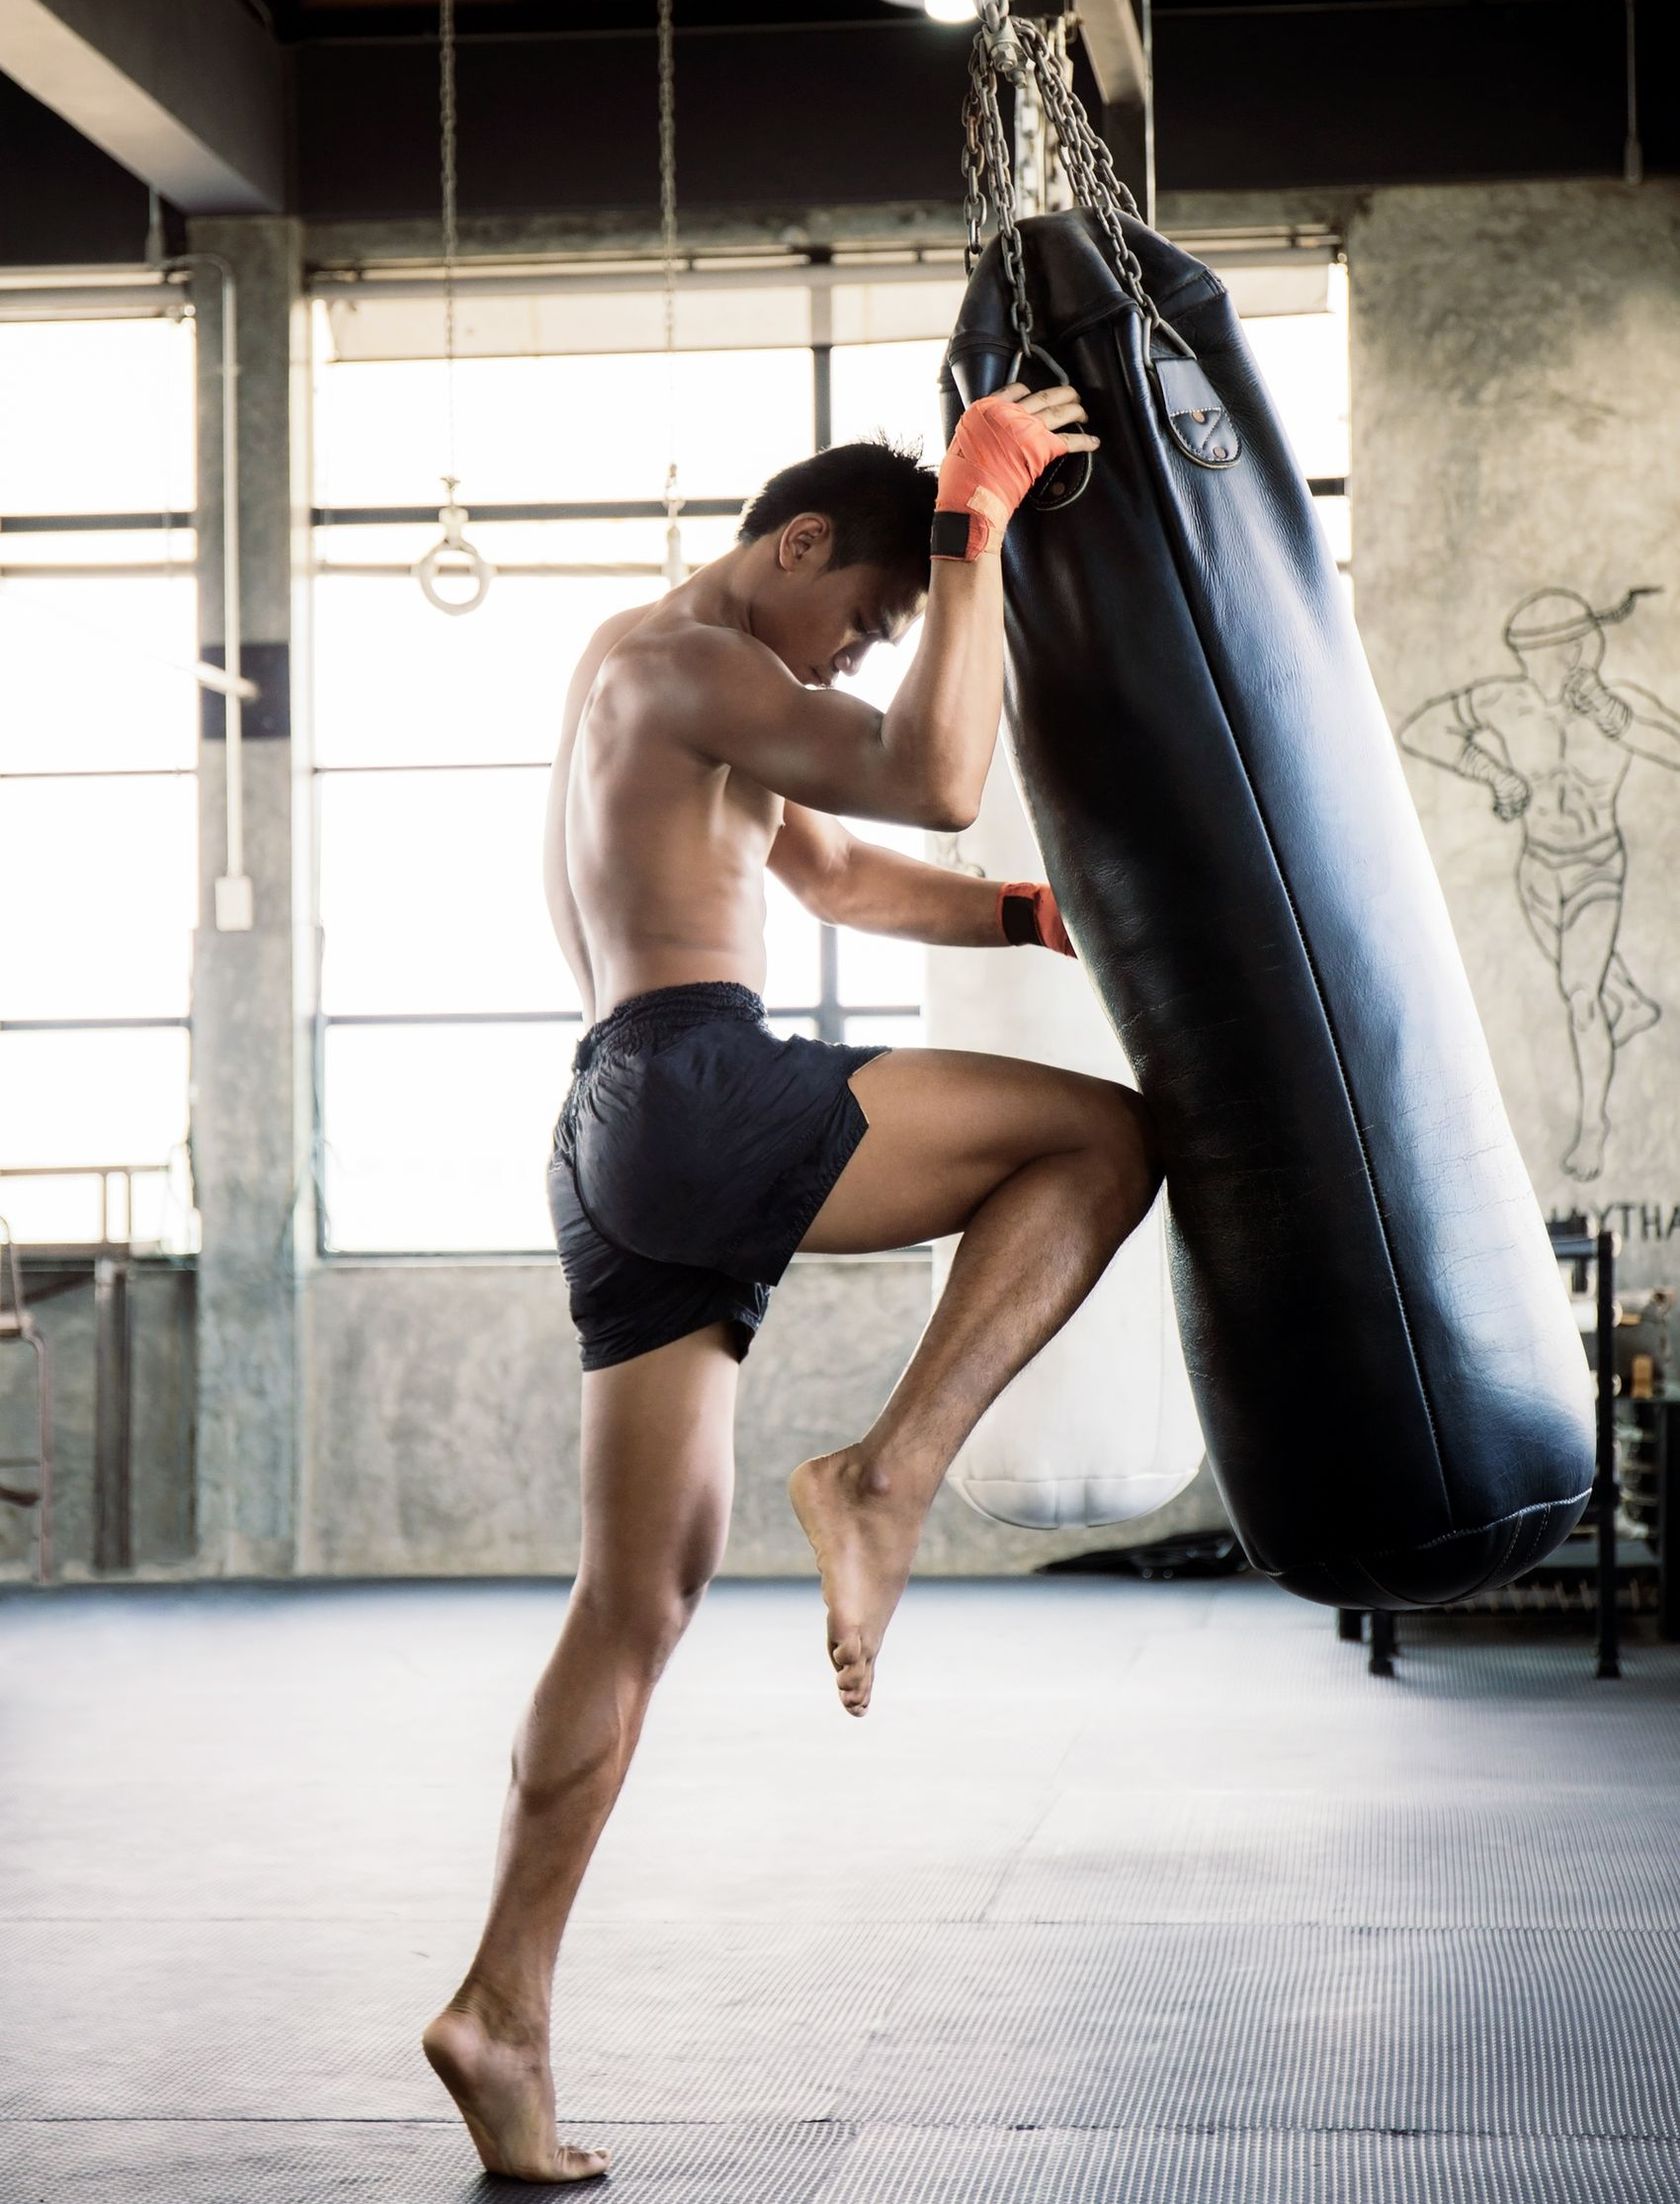 boxers-are-training-their-knees-with-punching-bag-GZDF4SQ.jpg